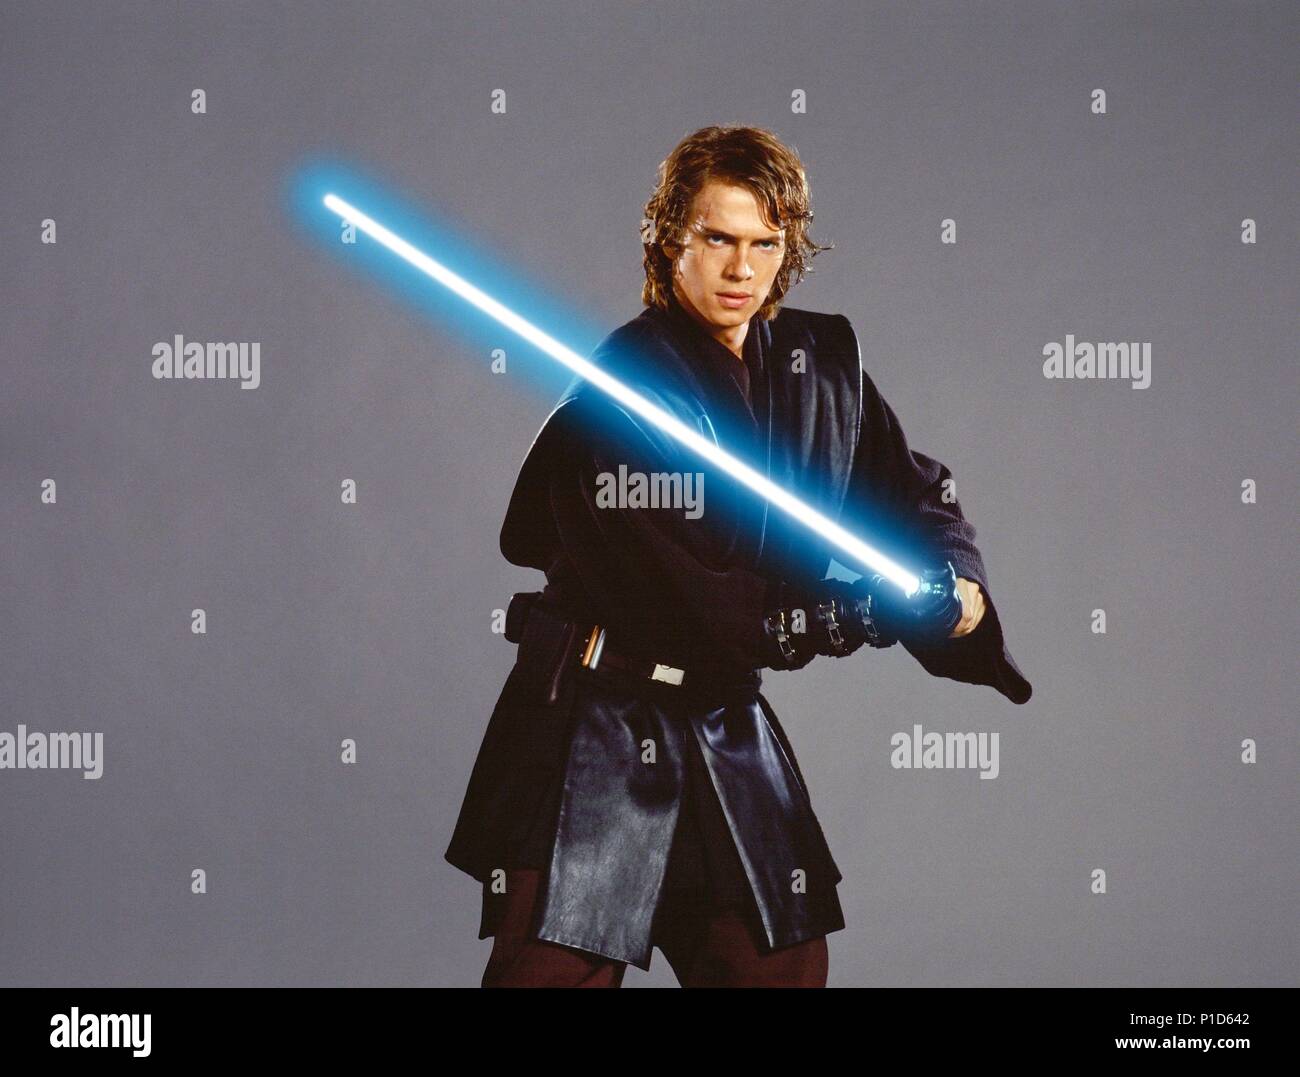 Star wars episode iii hi-res stock photography and images - Alamy